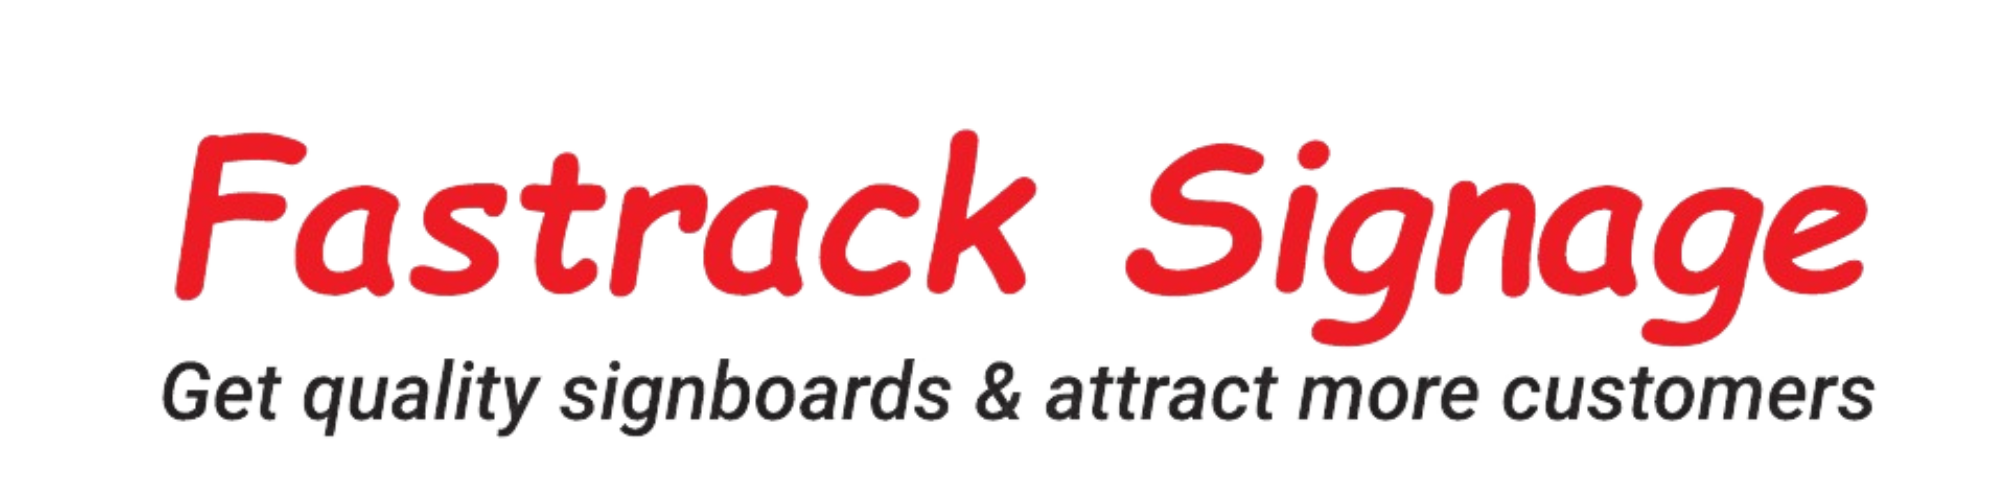 FastTrack Awards: Application & Frequently Asked Questions - Ann Arbor SPARK